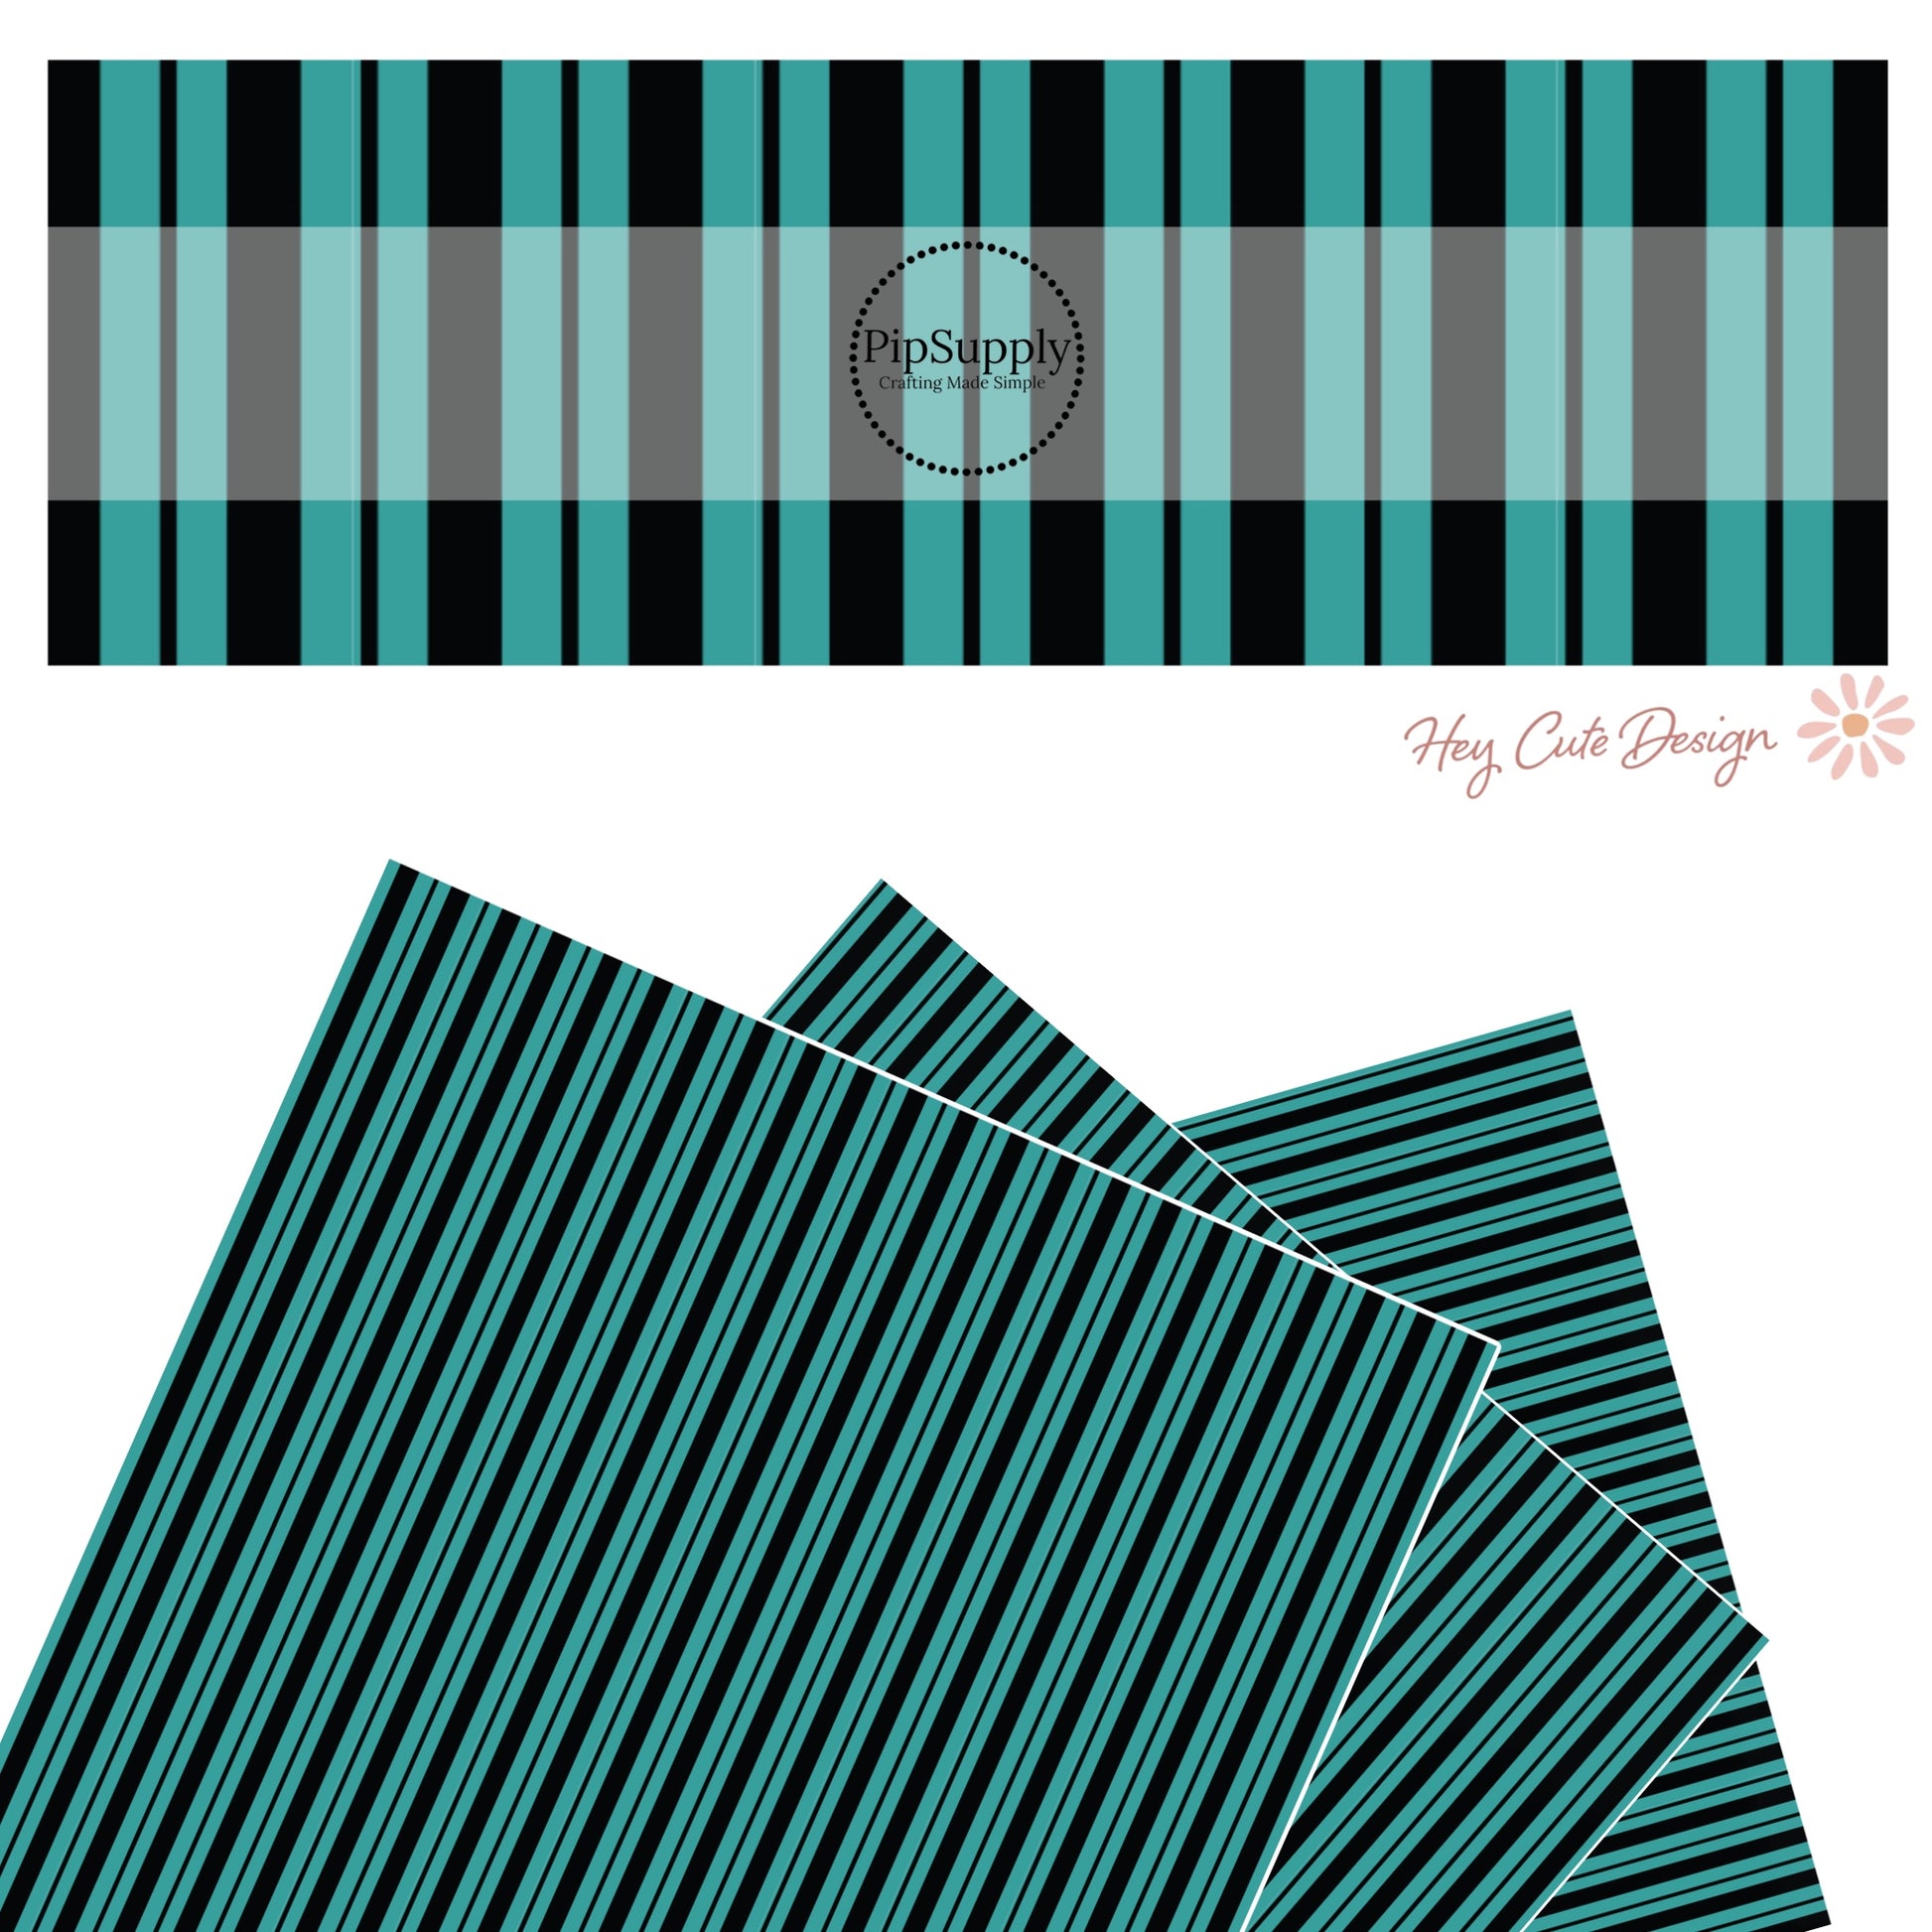 Multi thick and thin teal and black stripes faux leather sheets